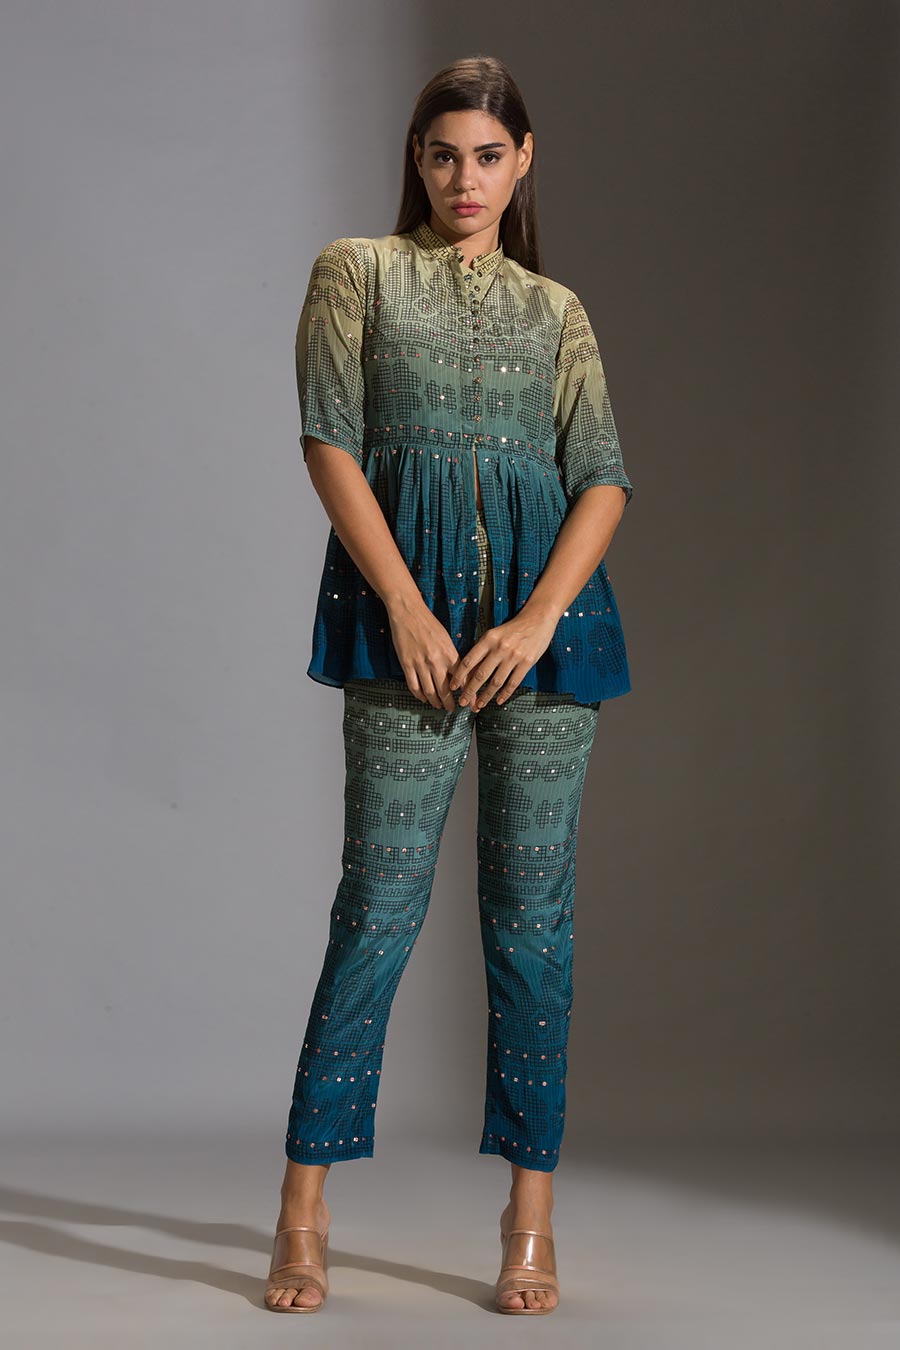 Shop Printed Peplum Top & Pant Co-Ord Set by SOUP BY SOUGAT PAUL at House  of Designers – HOUSE OF DESIGNERS